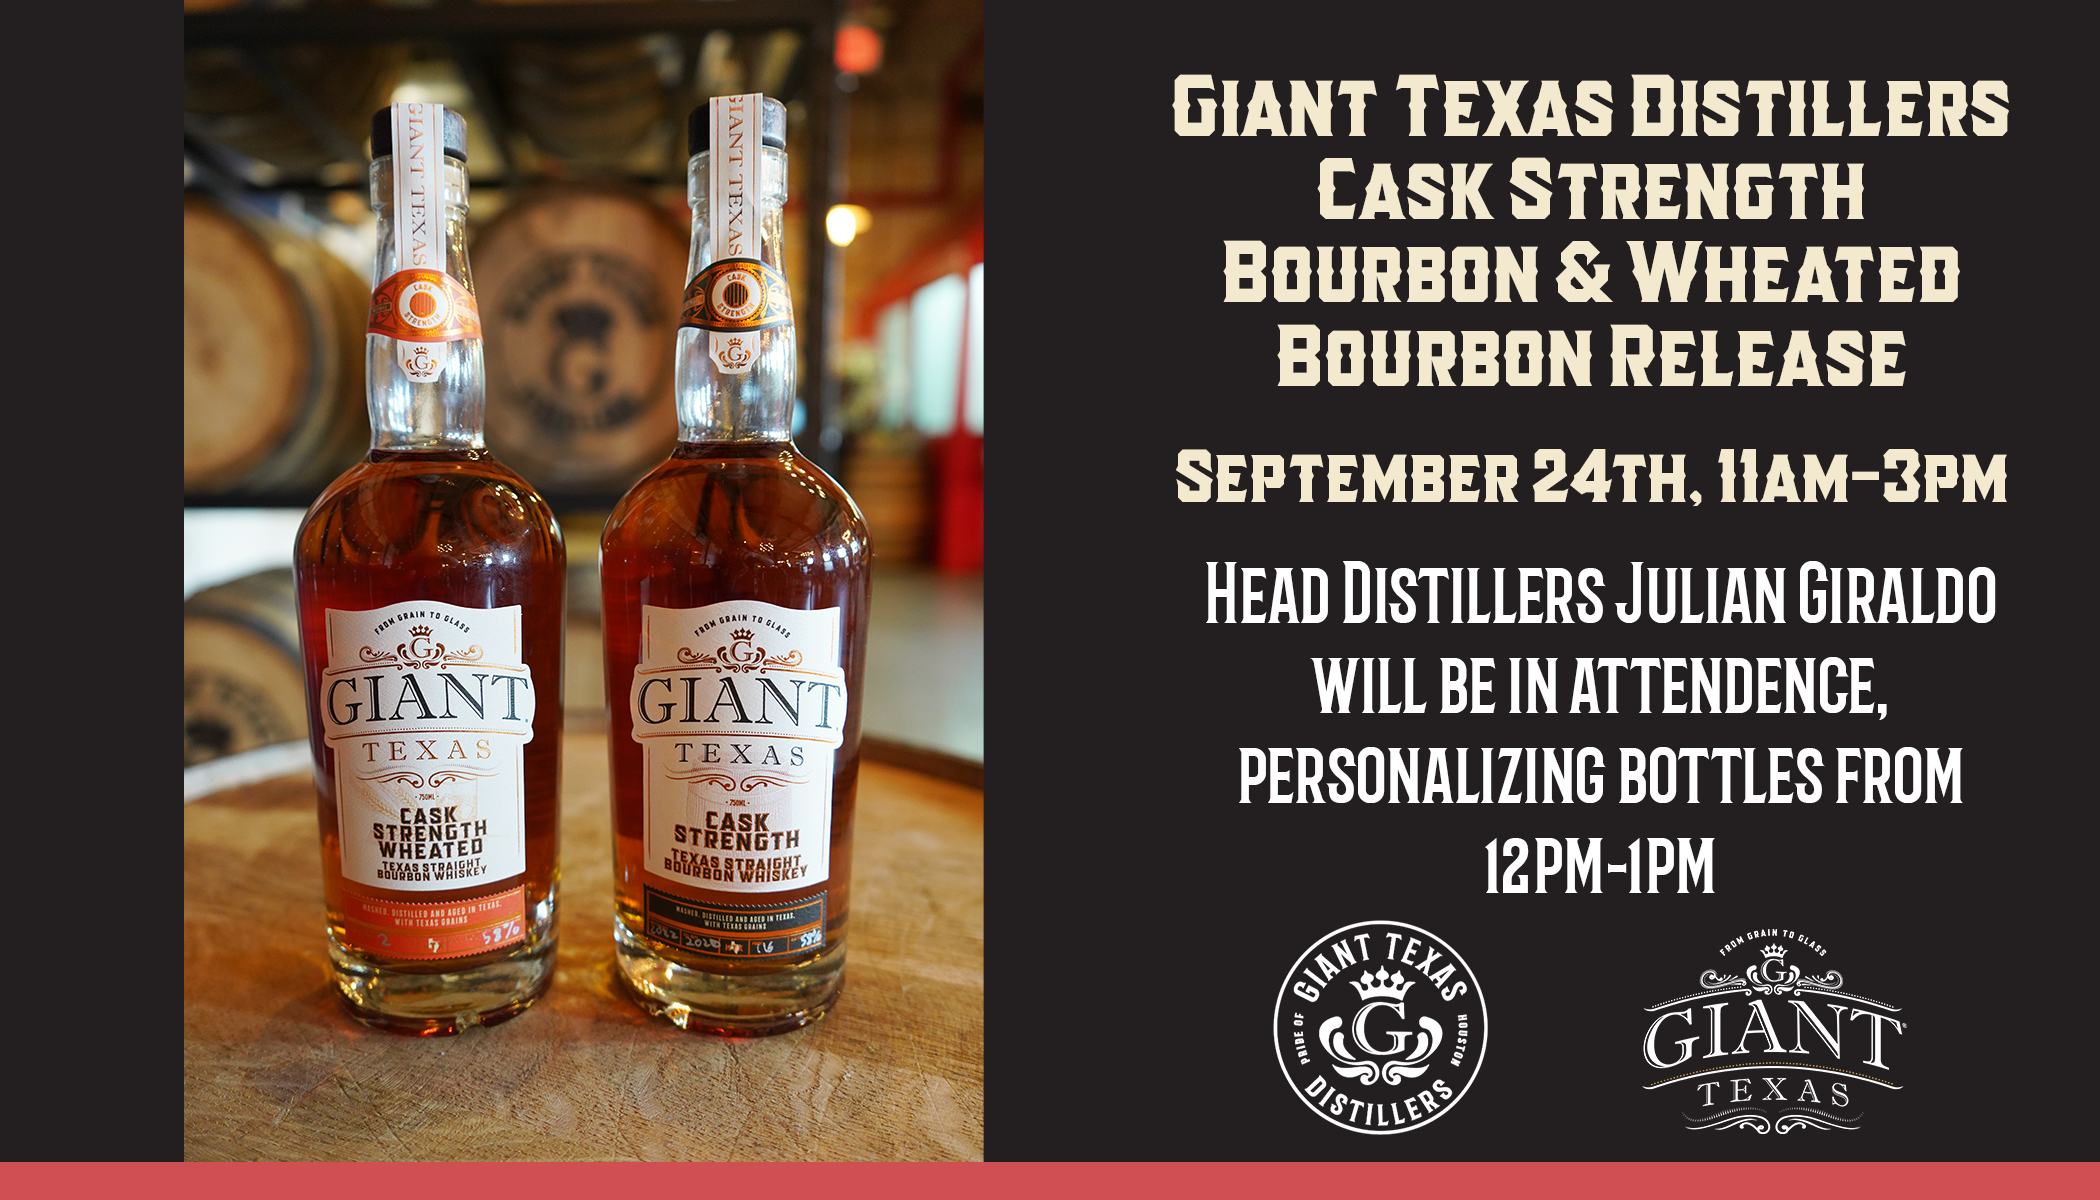 Giant Texas Cask Strength Bourbon and Wheated Bourbon Release